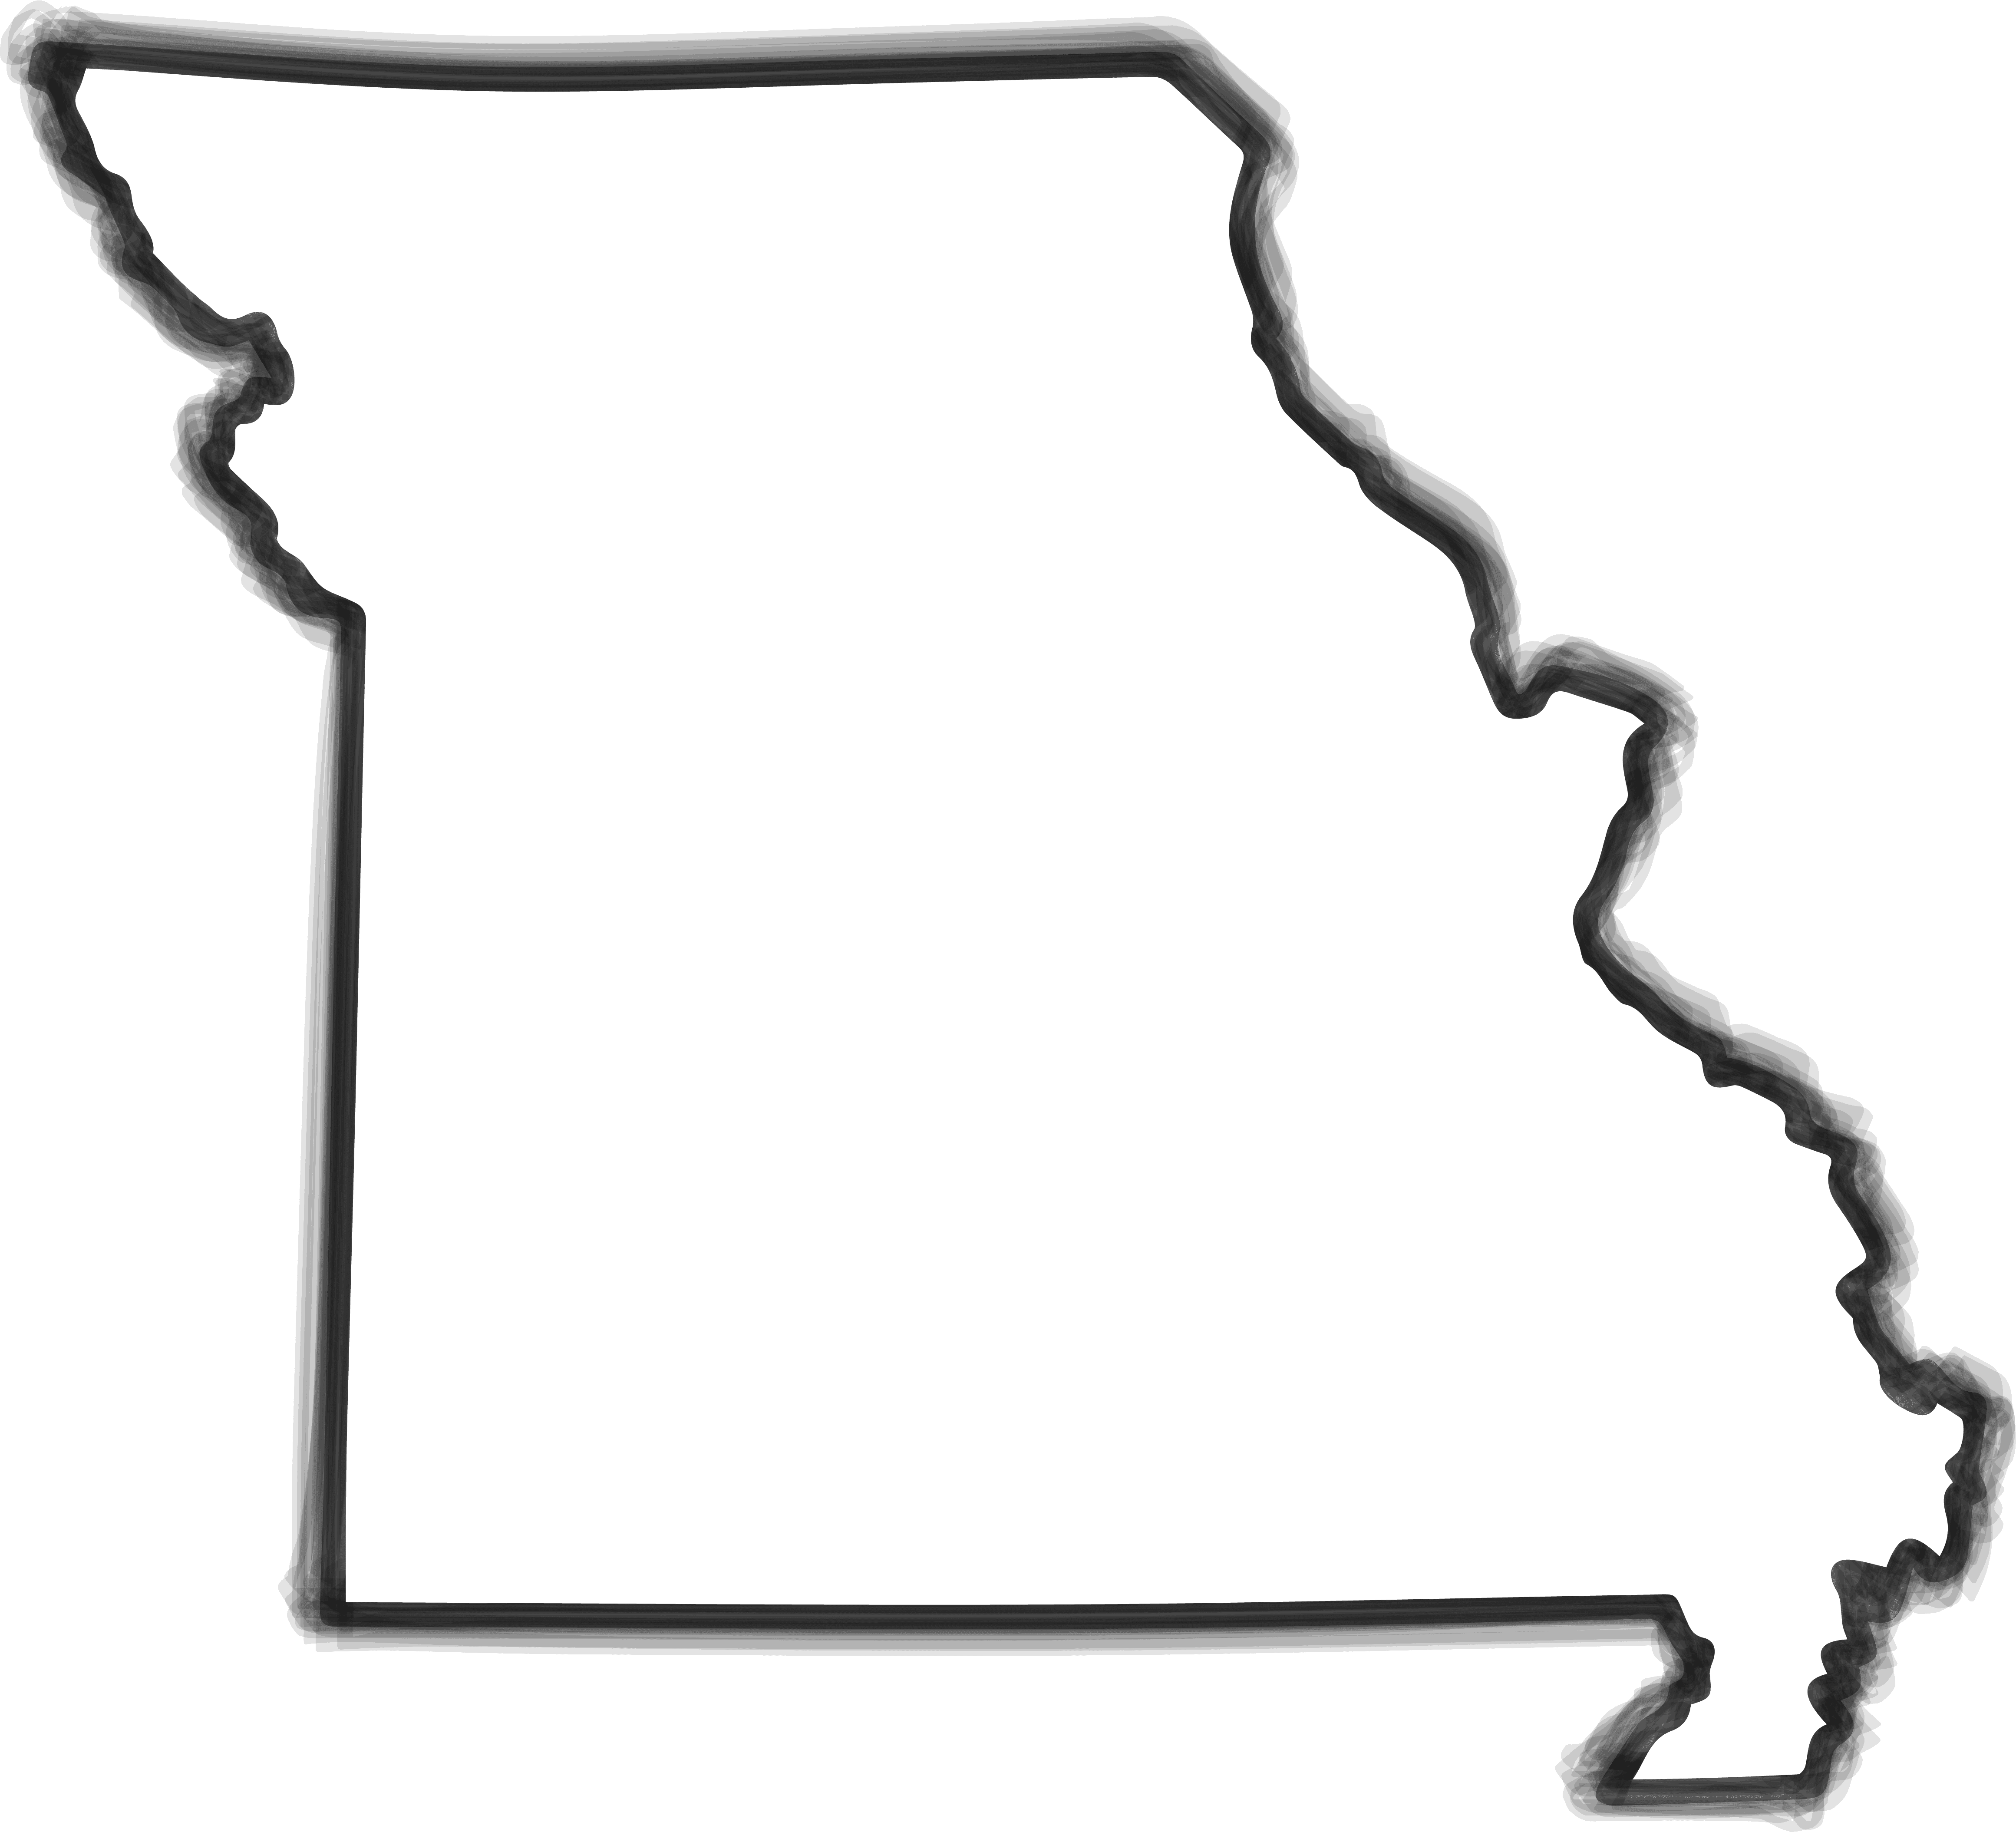 Providing Medicare Services all across the Great State of Missouri